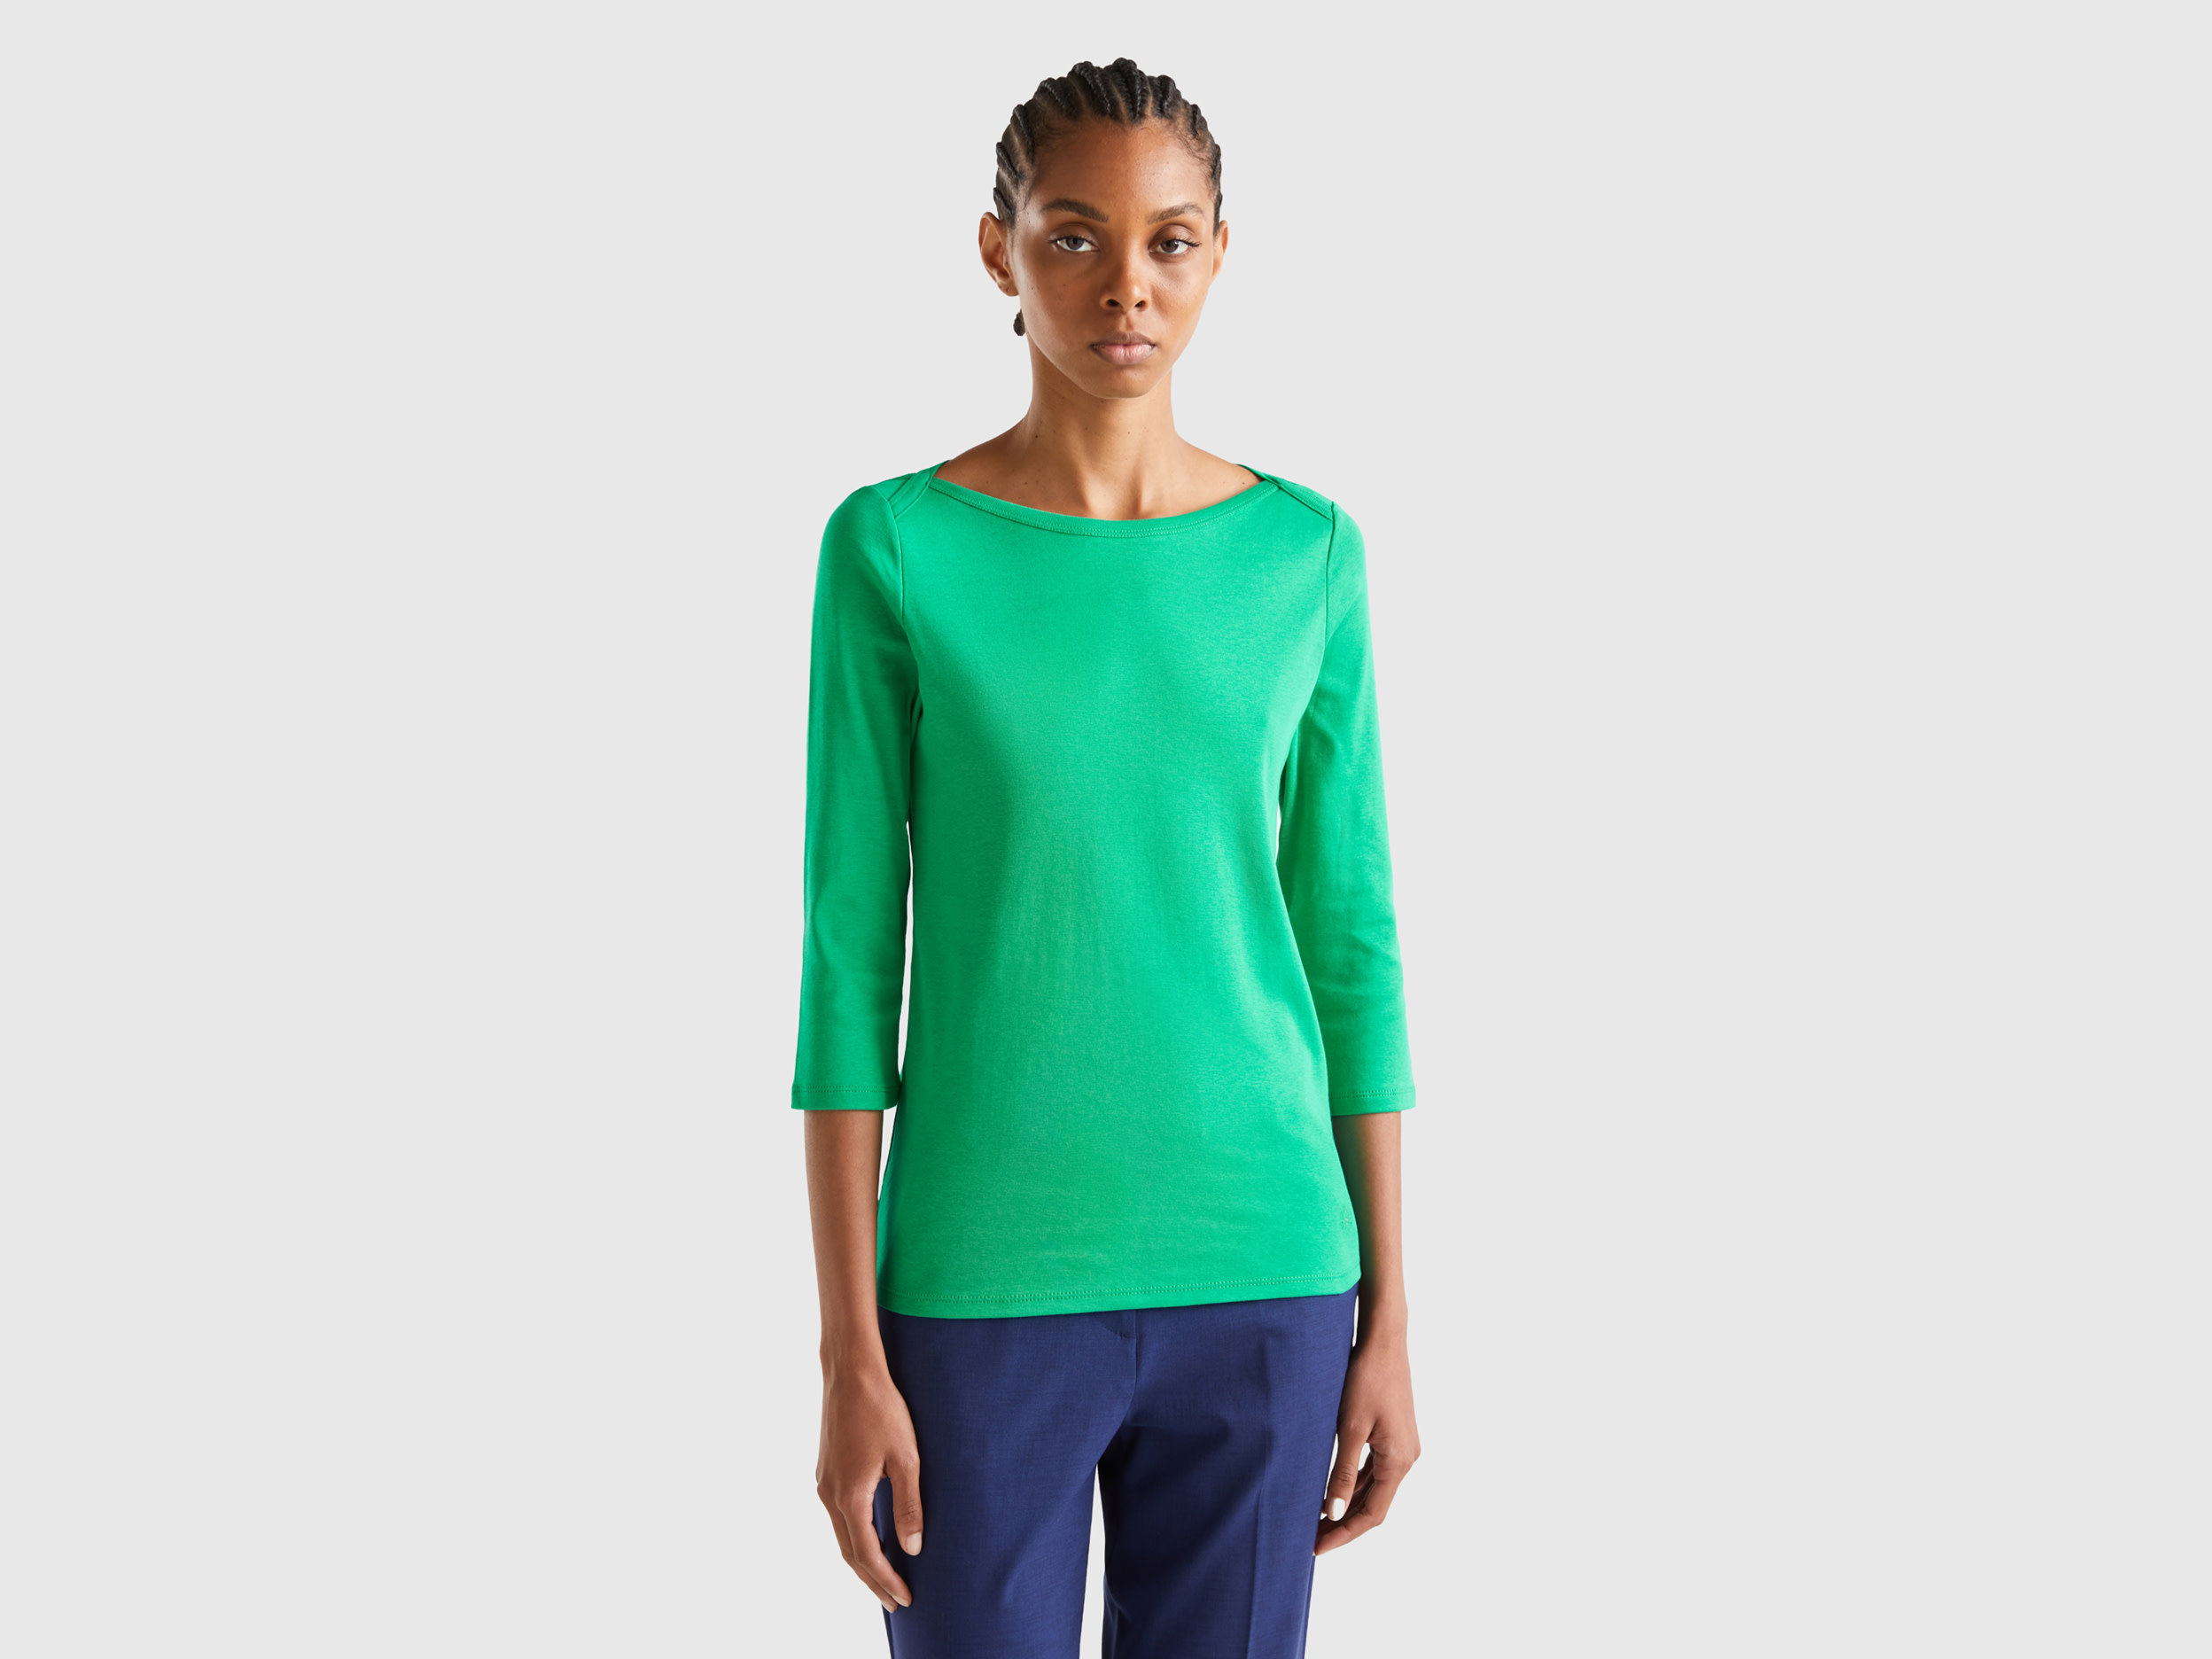 Benetton, T-shirt With Boat Neck In 100% Cotton, size L, Green, Women